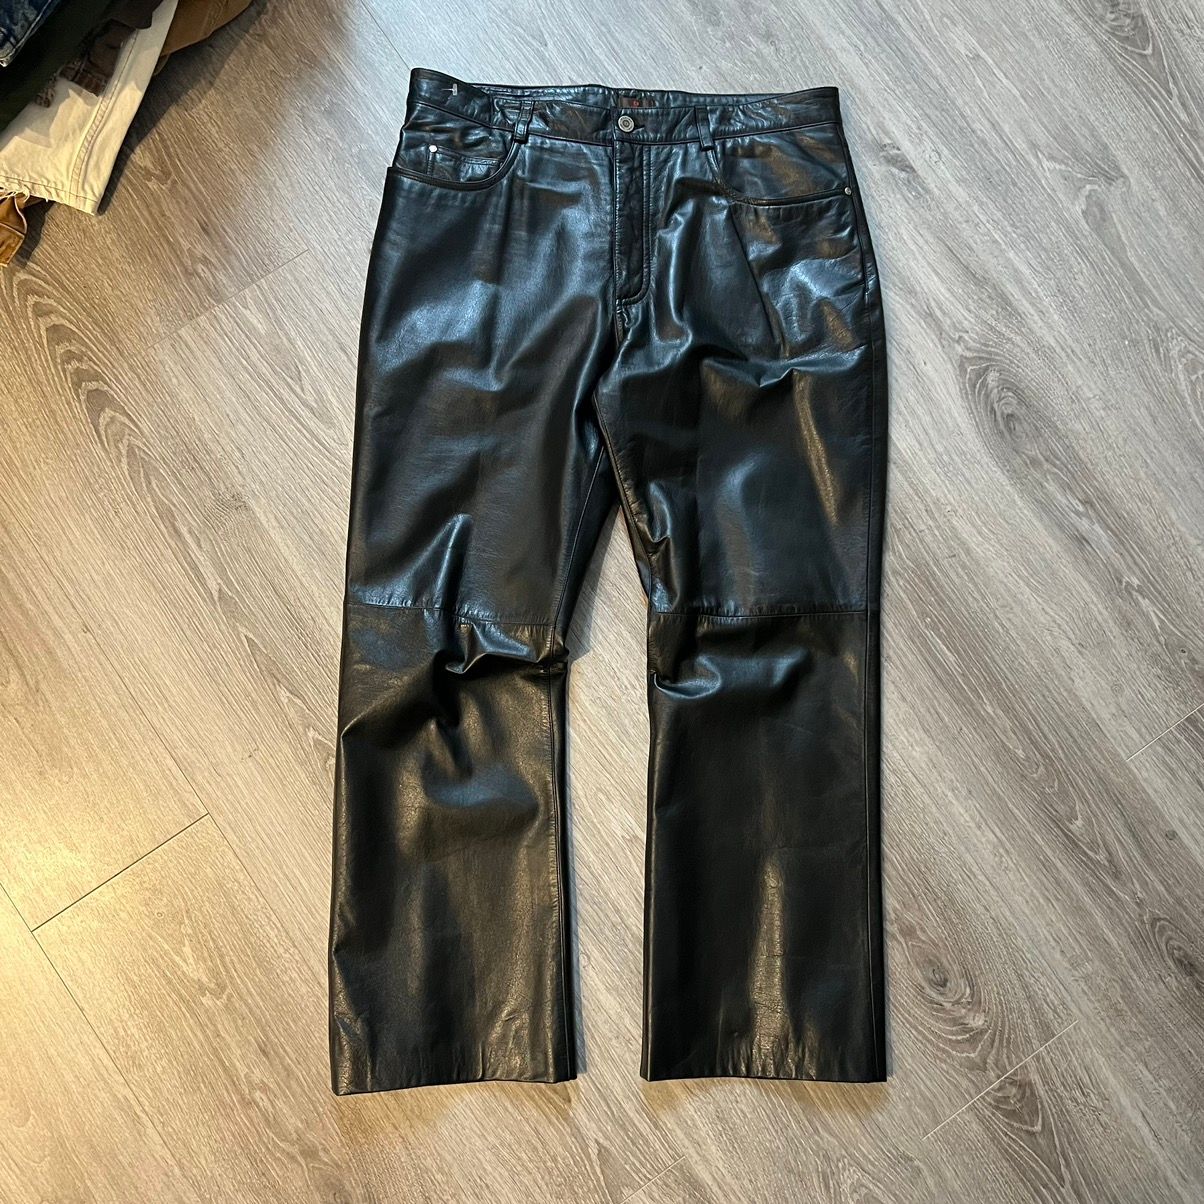 Leather Danier Leather pants loose fit | Grailed